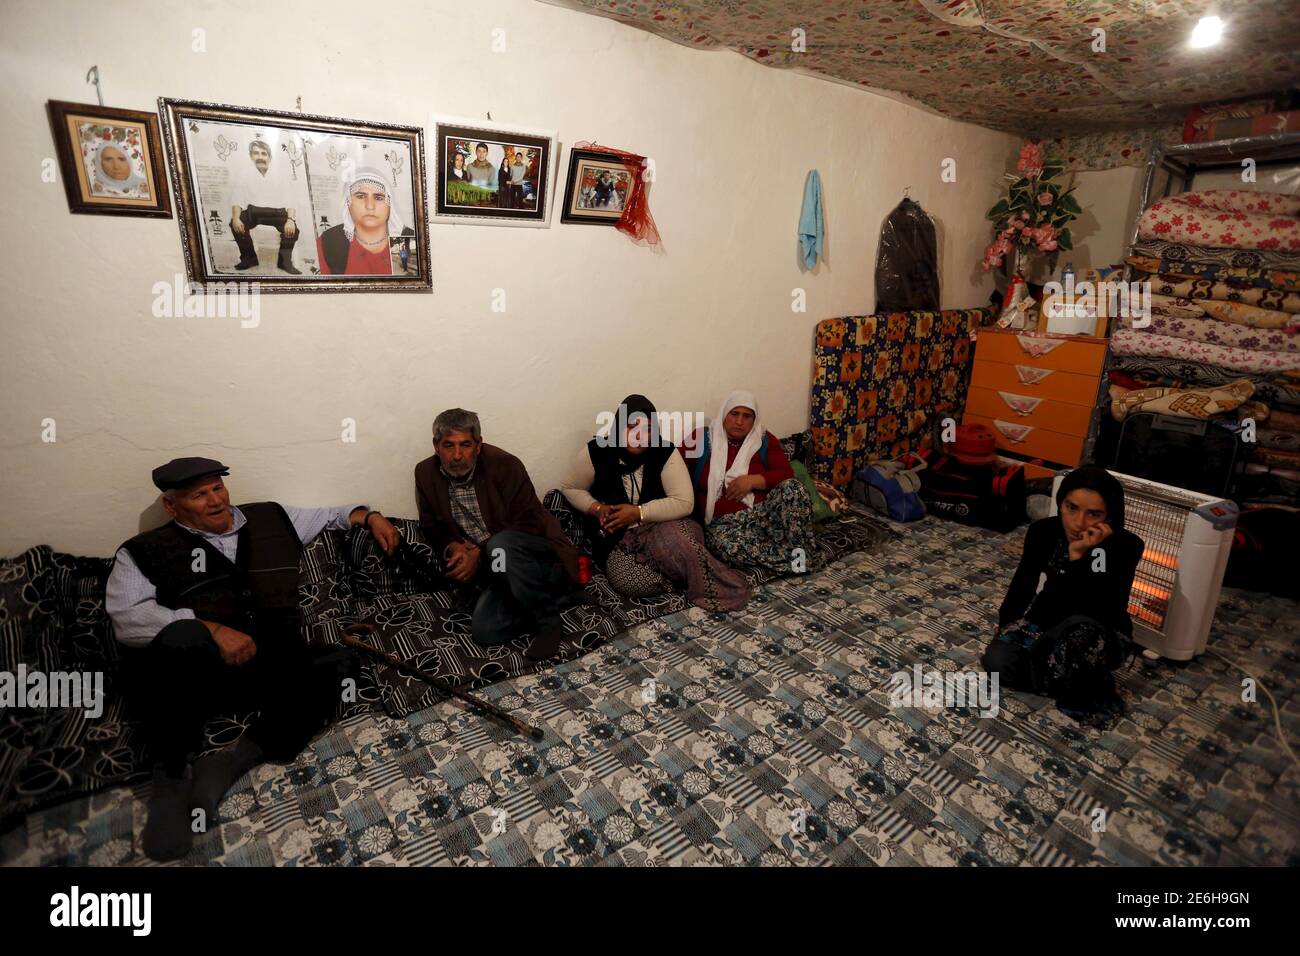 Sevgi Gezici (R), widow of Engin Gezici, sits next to her family members at their house in the southeastern town of Silvan in Diyarbakir province, Turkey, December 7, 2015. The shepherd's widow no longer asks God for peace. Like many Kurds in Turkey's southeast, Sevgi Gezici, 22, believed President Tayyip Erdogan would relent in a violent clampdown against Kurdish militants after his party won back its majority in an election in November. Three days after the vote, her husband, just back from seven months tending sheep, was shot dead in the street, caught in the crossfire as he ventured out of Stock Photo